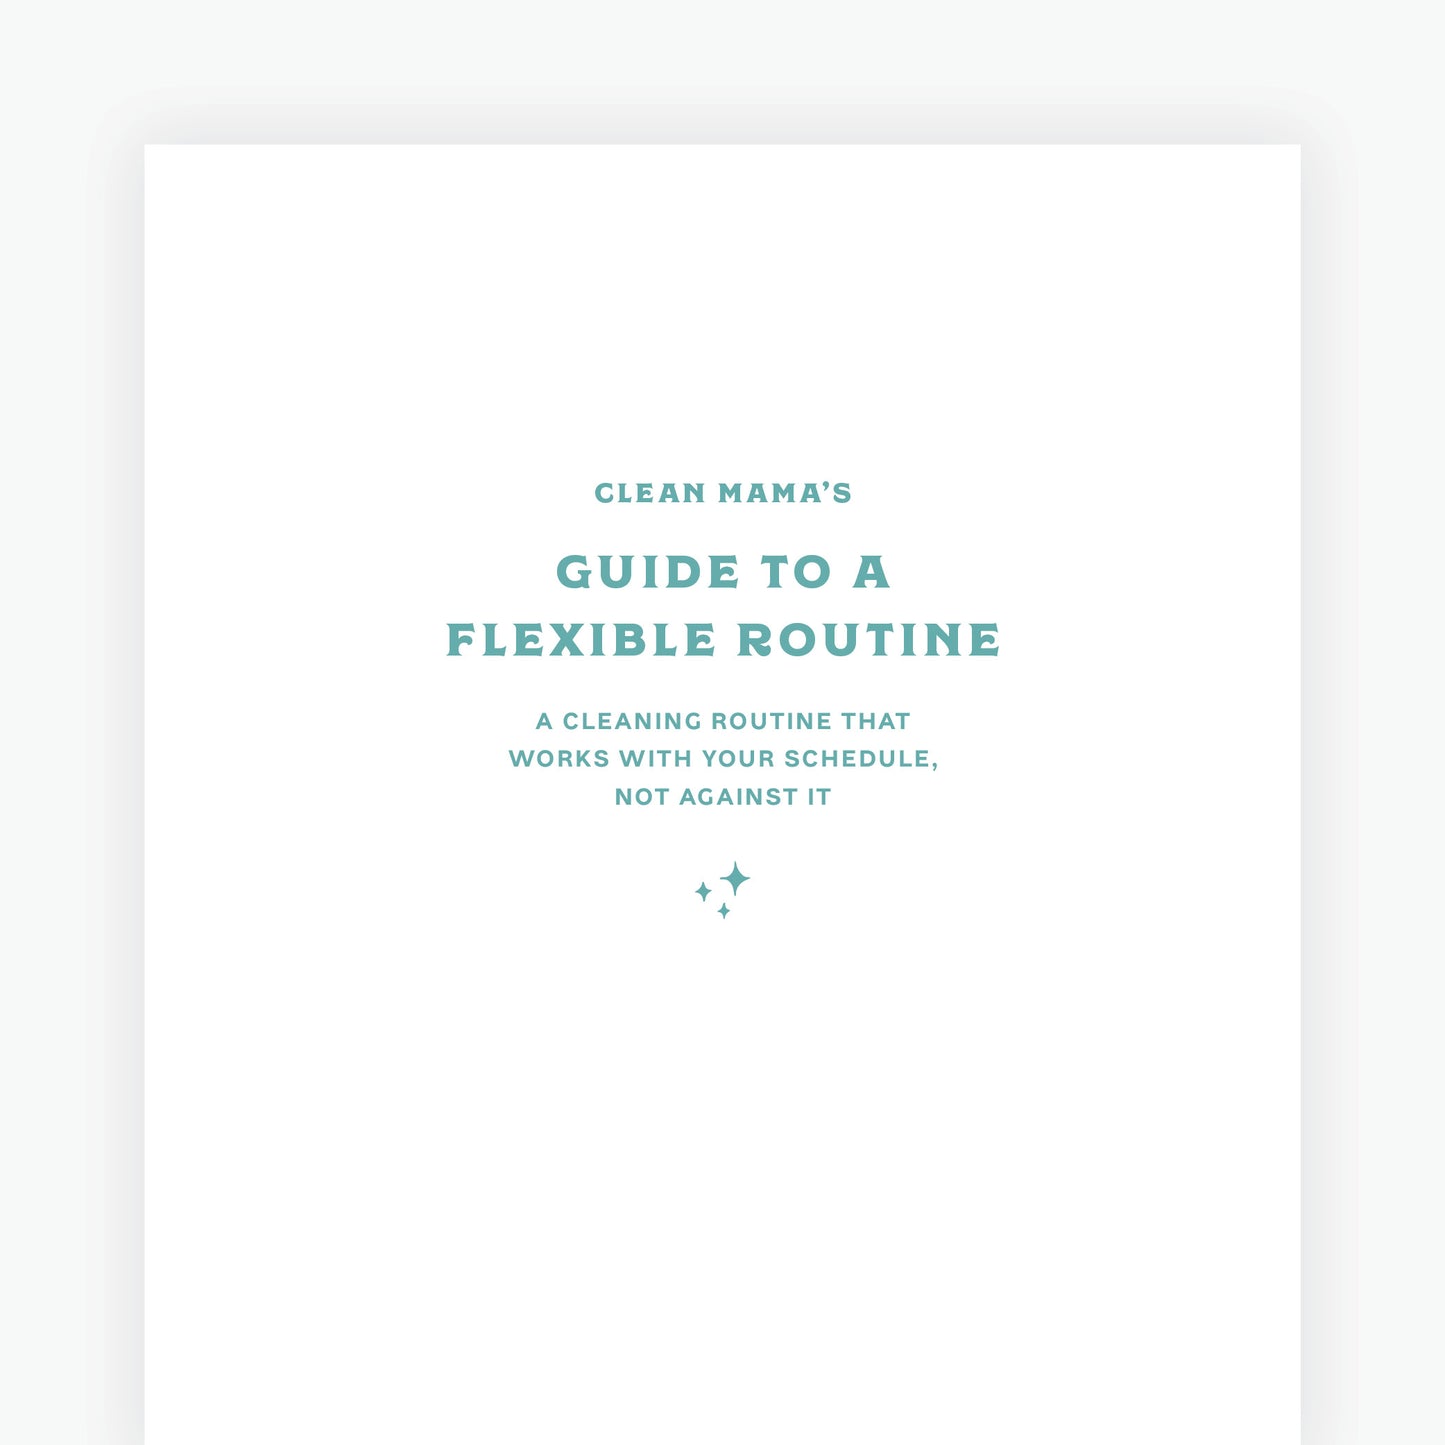 Guide to a Flexible Routine